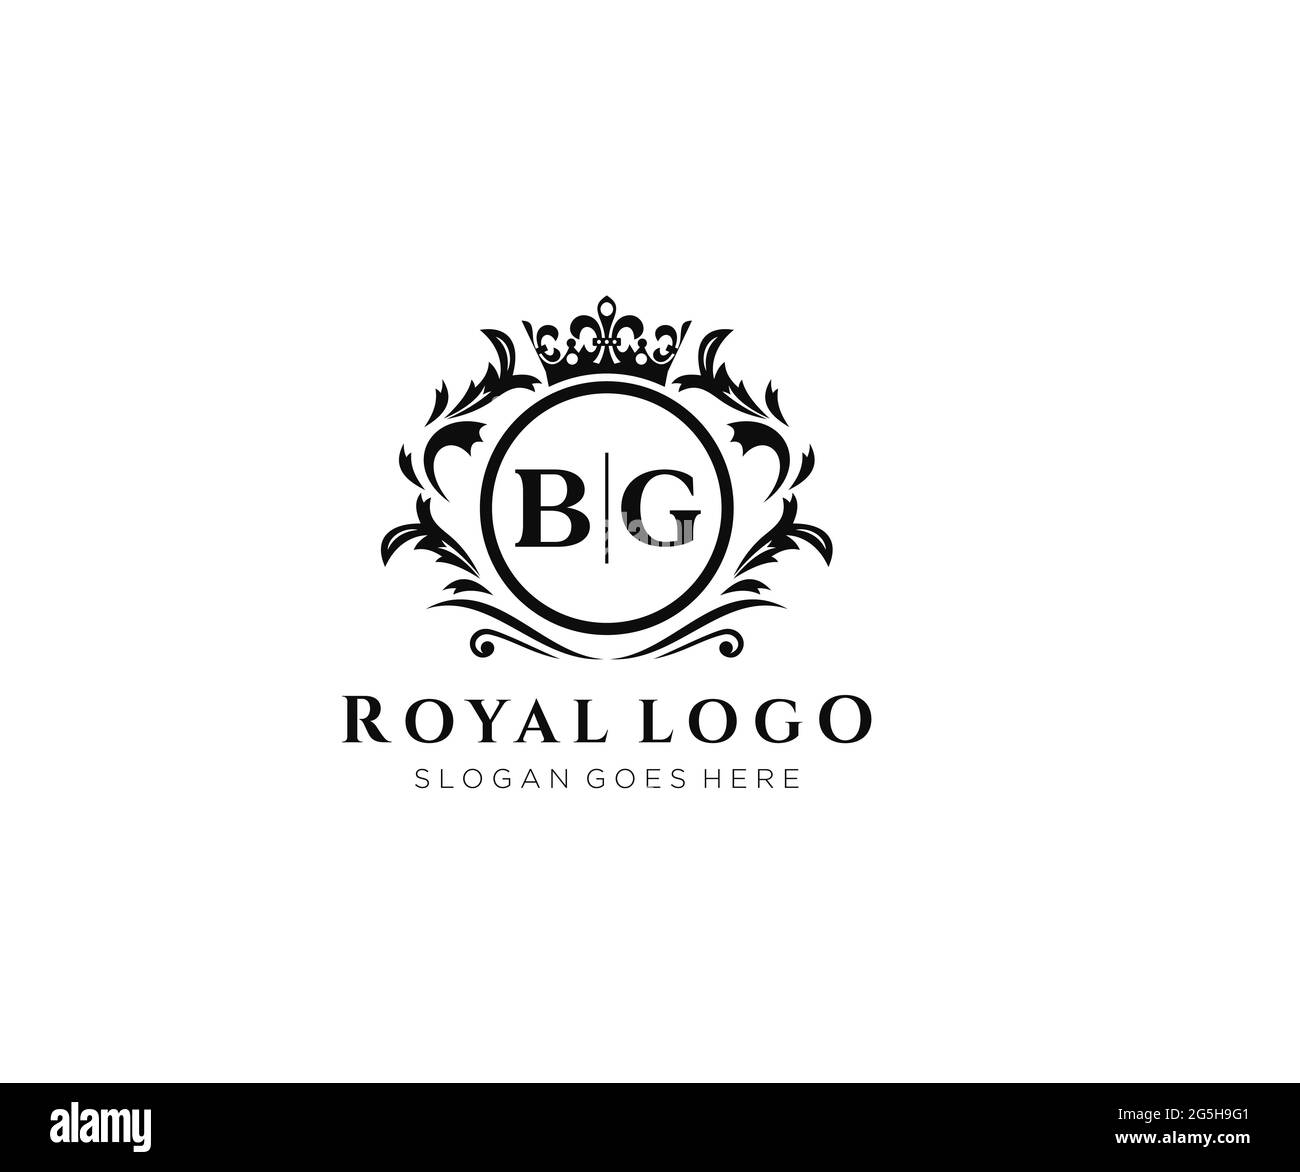 BG Letter Luxurious Brand Logo Template, for Restaurant, Royalty, Boutique, Cafe, Hotel, Heraldic, Jewelry, Fashion and other vector illustration. Stock Vector